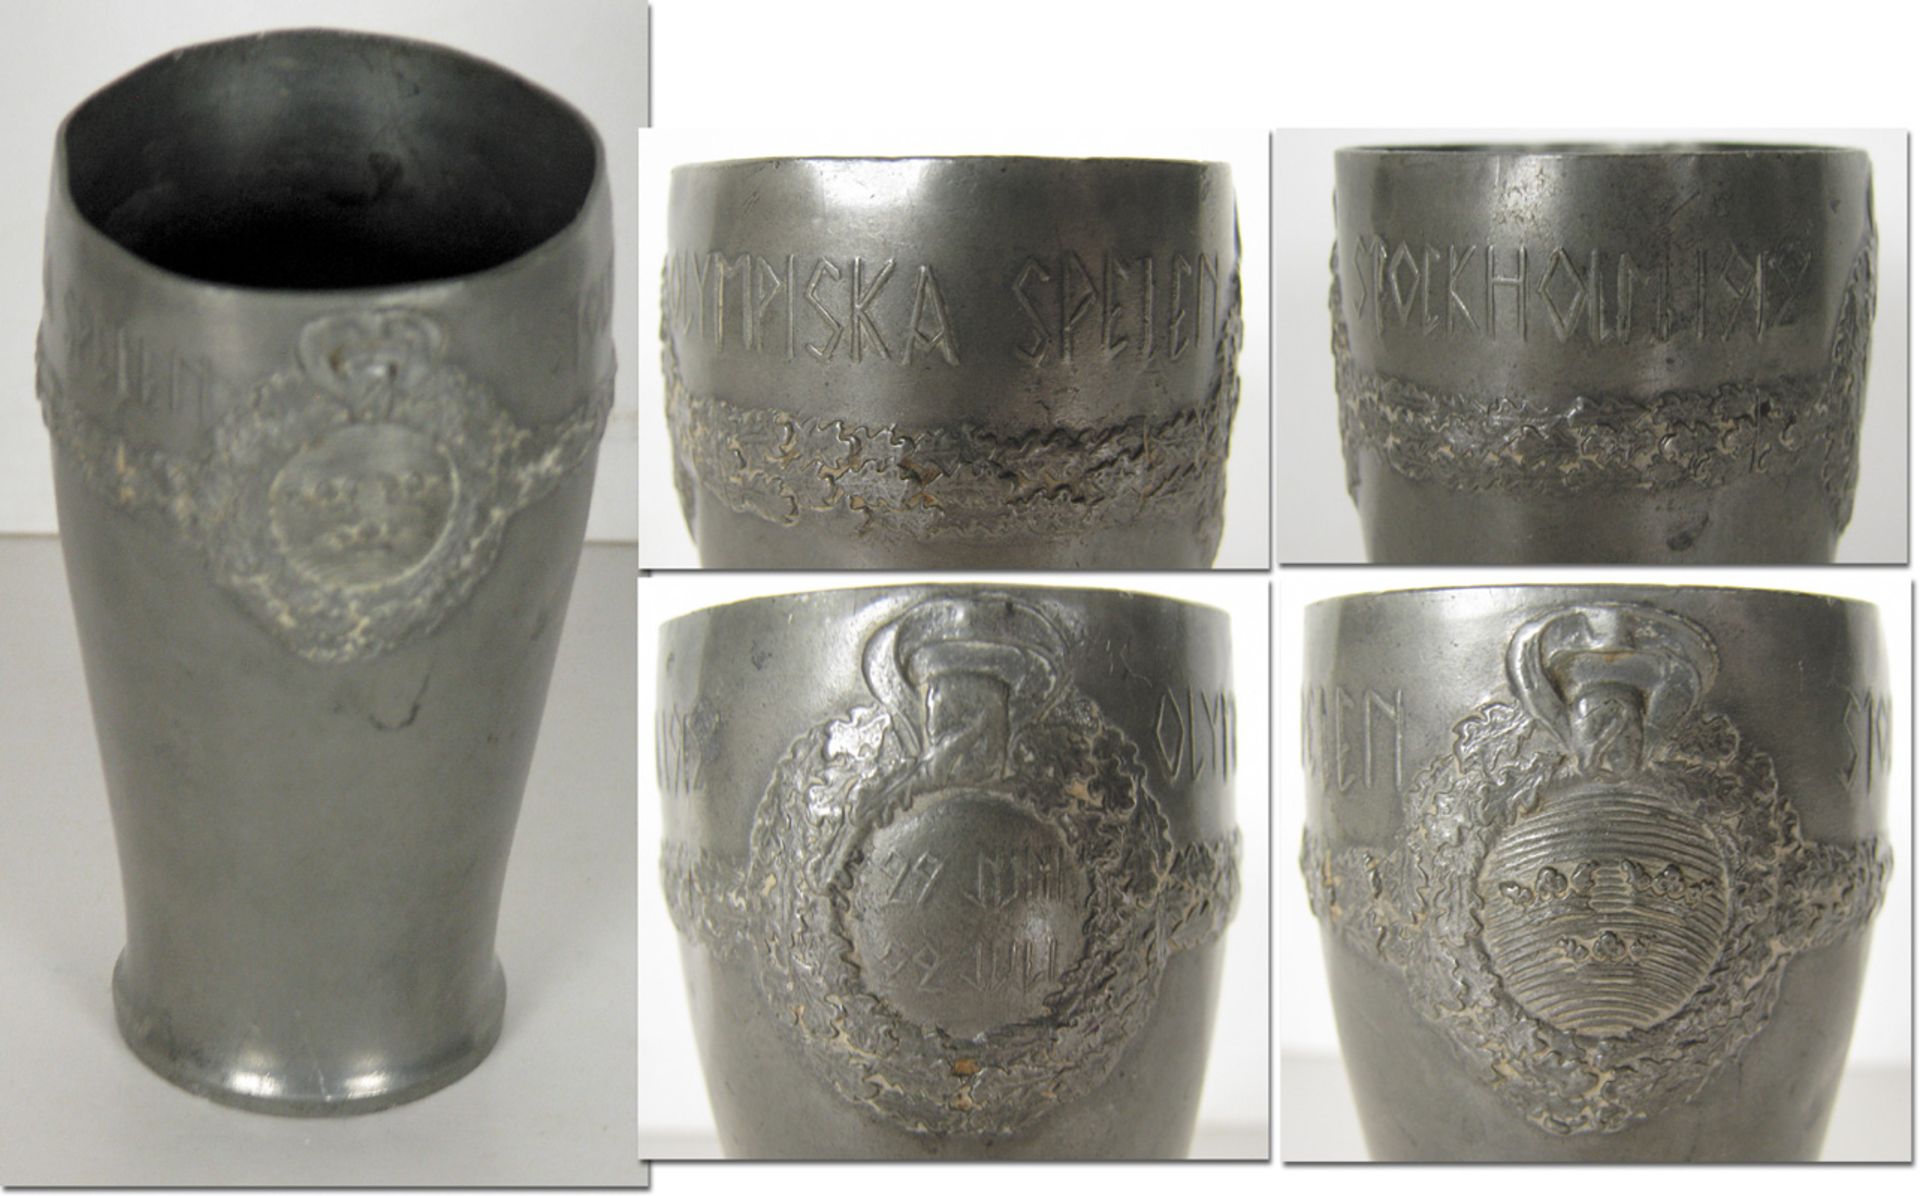 Olympic Games 1912. Commemorative Pewter cup - Pewter beaker with relief Swedish Coat of Arms and oa